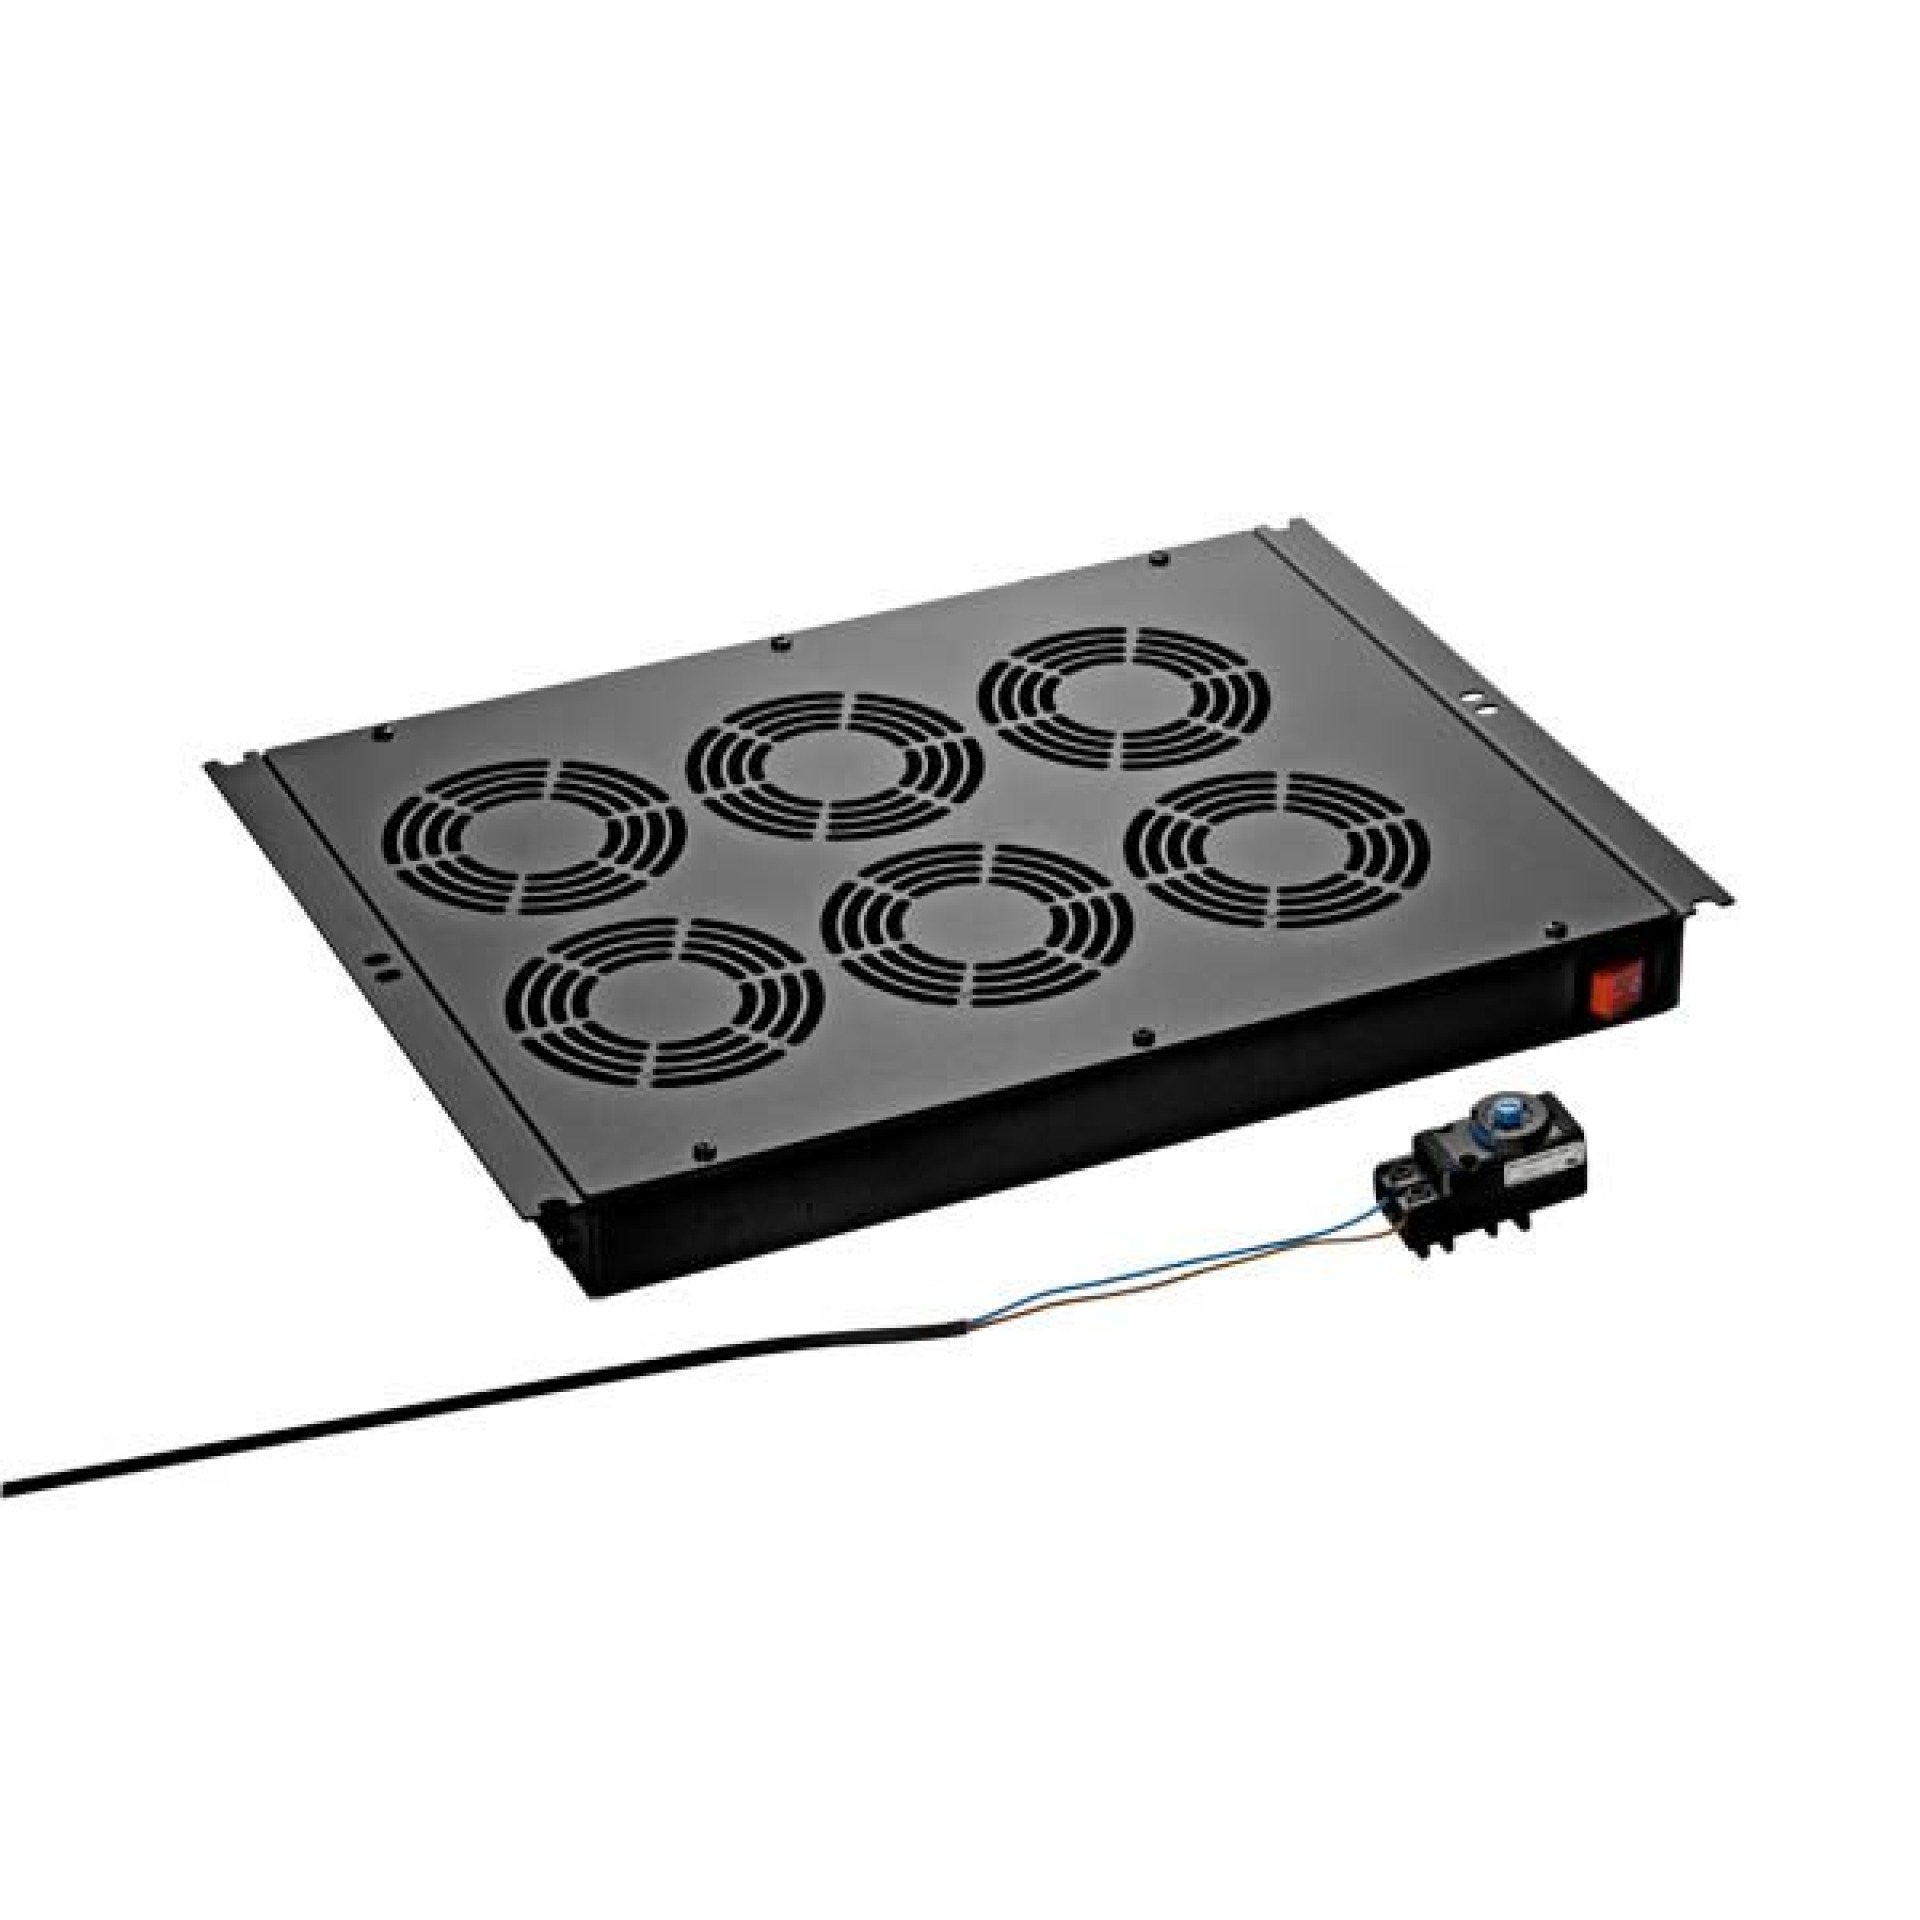 Roof Fan Unit, 6 x Fan, for Network and Server Cabinets